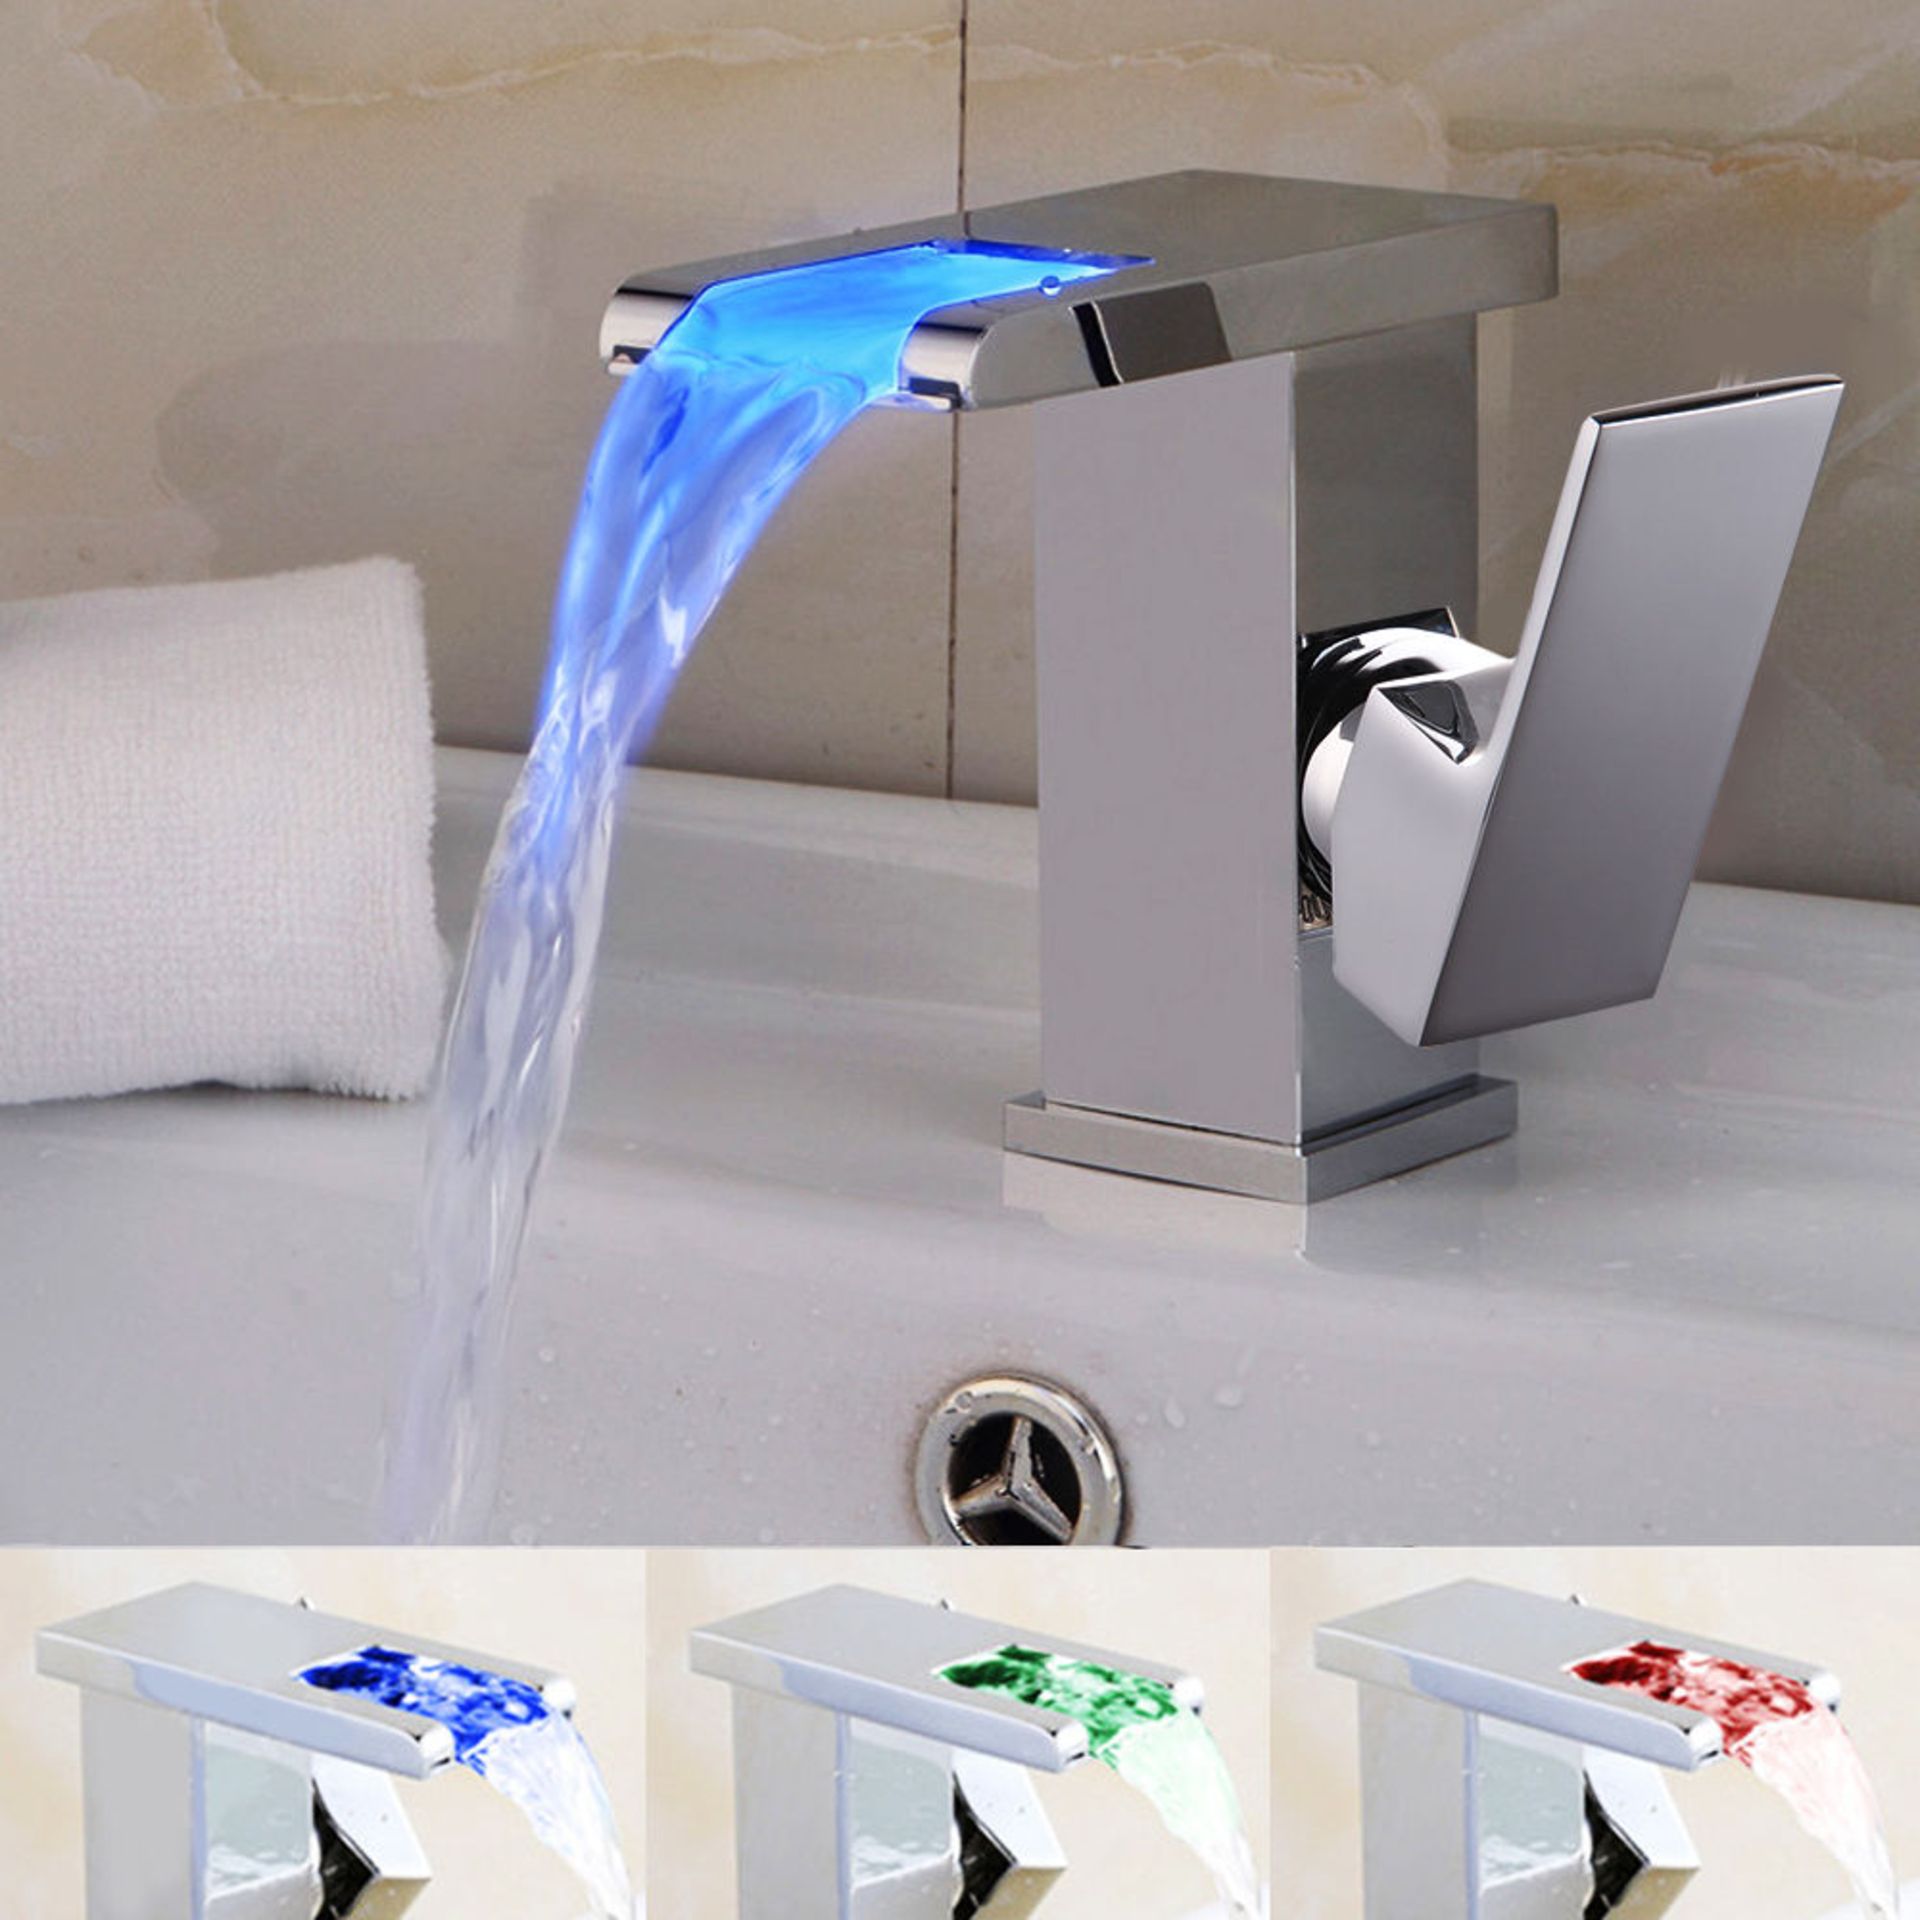 (I67) LED Waterfall Bathroom Basin Mixer Tap. RRP £229.99. Easy to install and clean. All copper